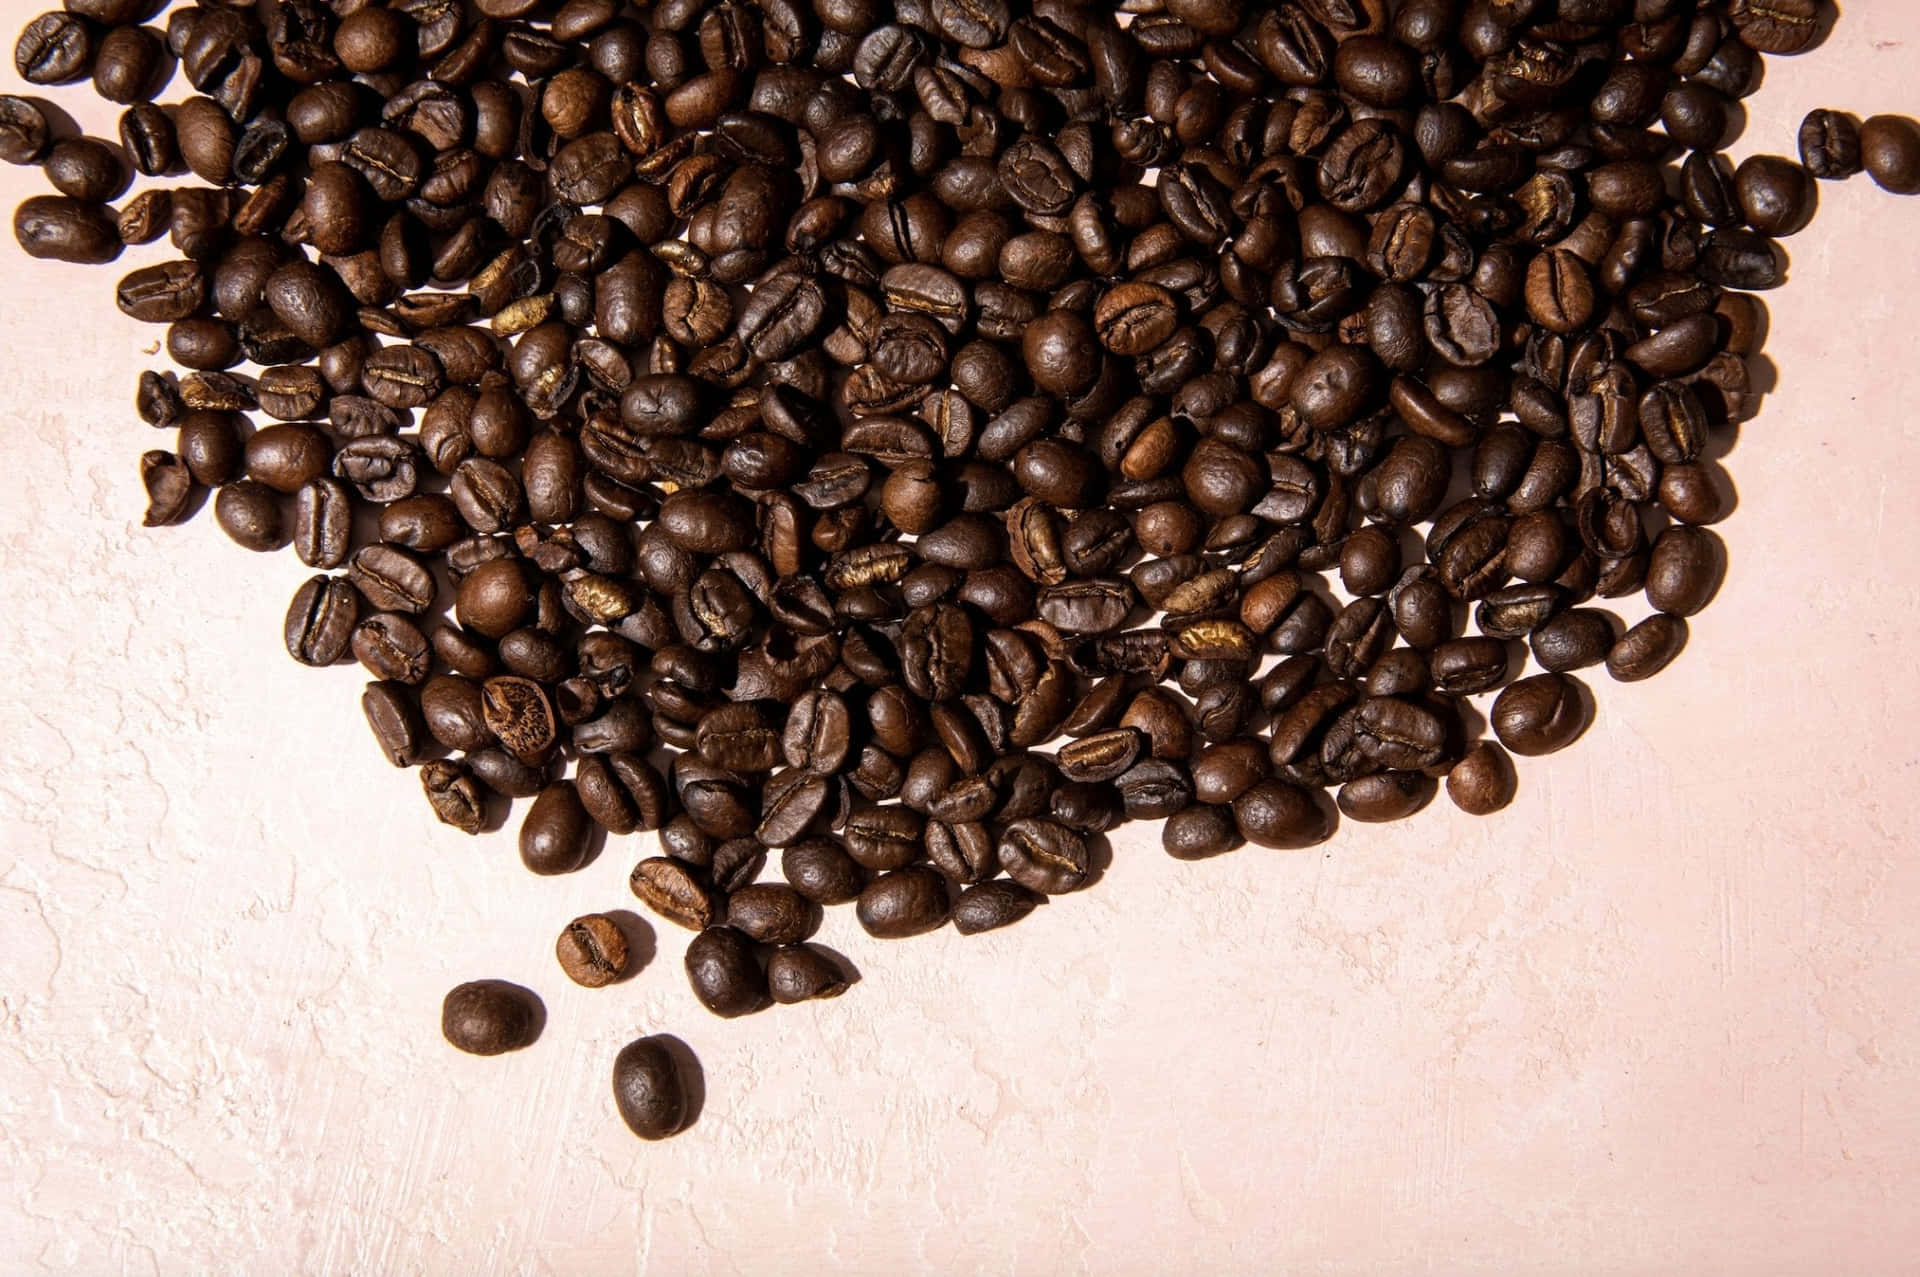 The Aroma of Freshly Roasted Coffee Beans